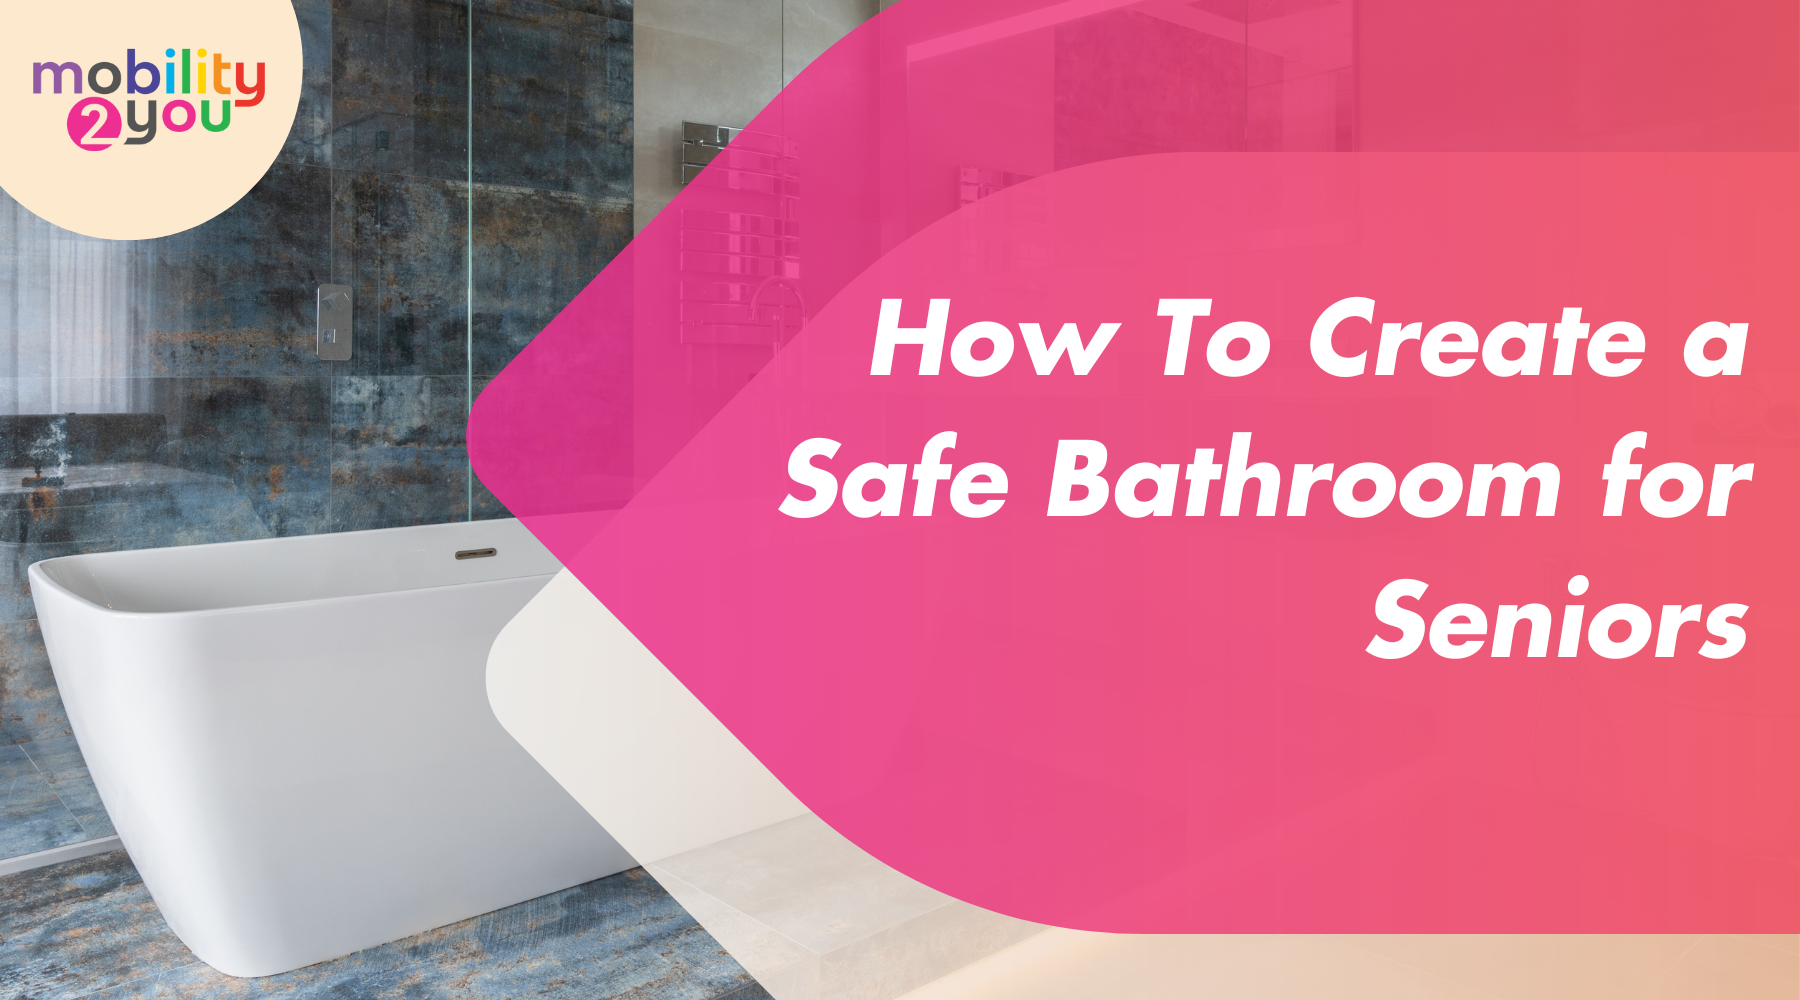 A safe bathroom for seniors is easily achievable with minor adjustments.